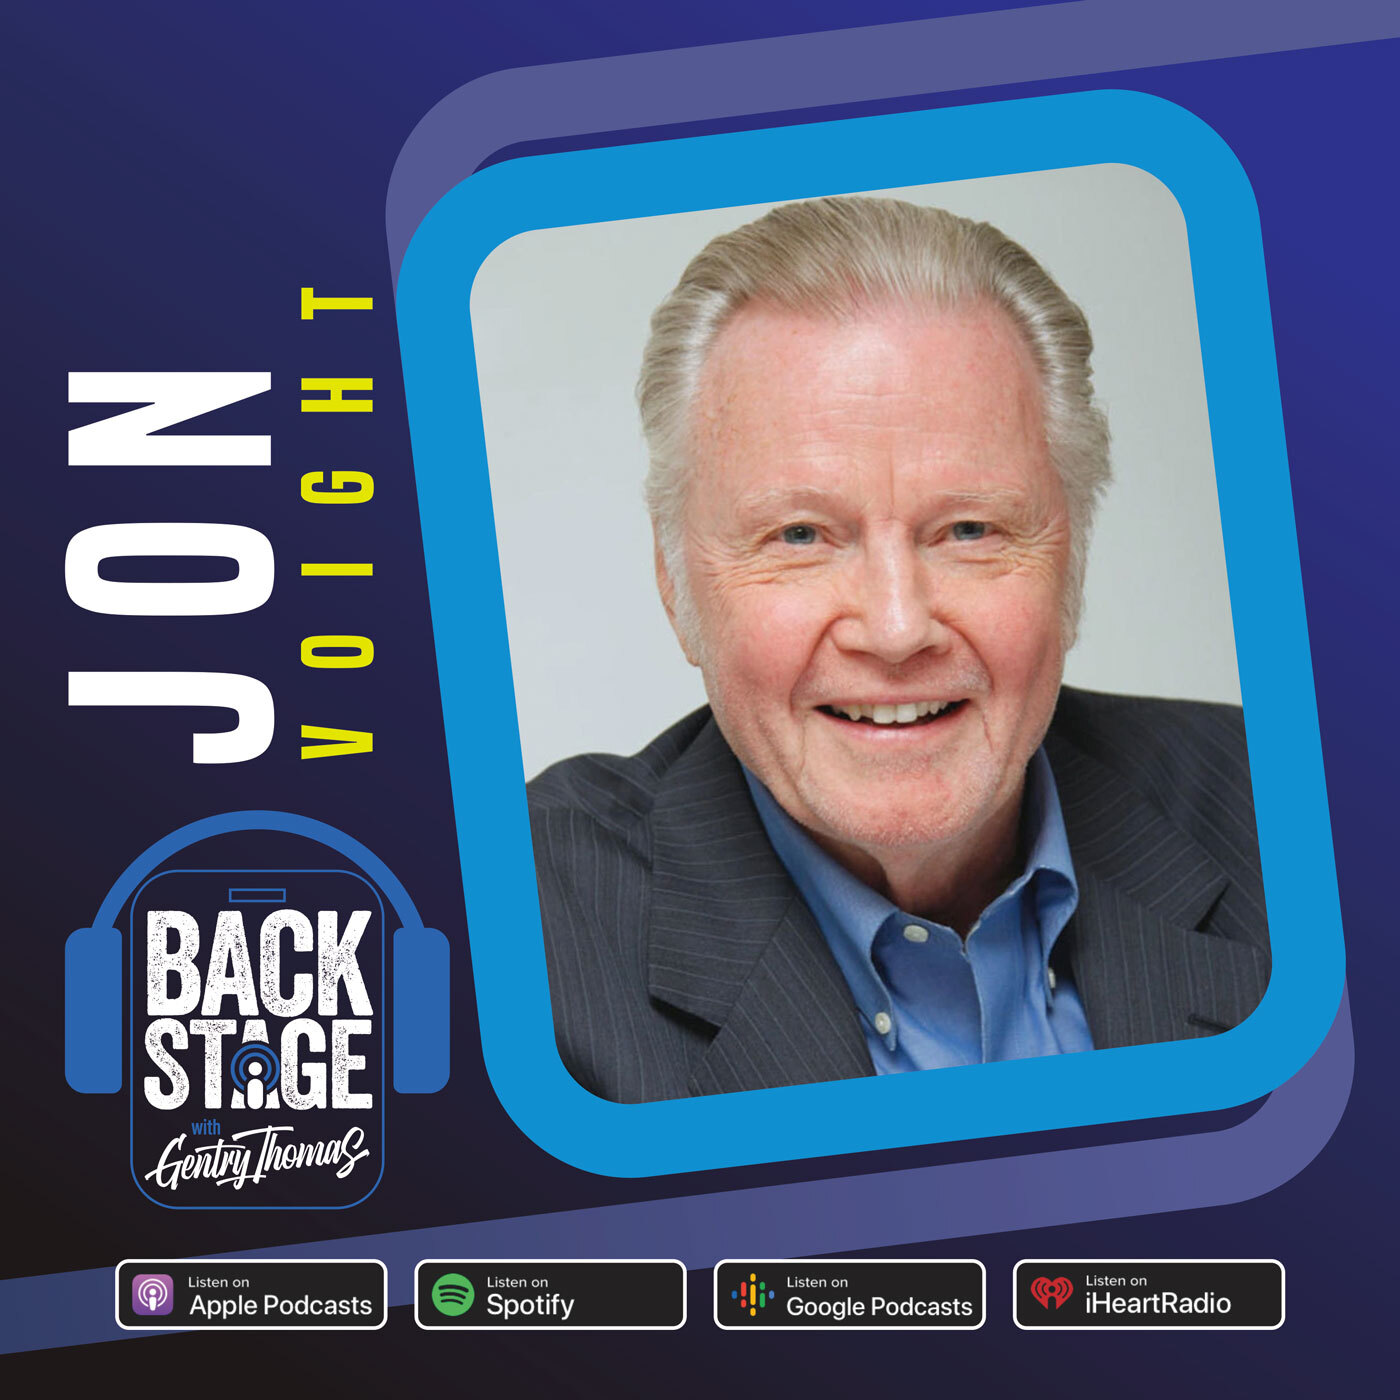 Jon Voight goes Backstage with Gentry Thomas to talk Hollywood, The Bible and women he's been friendly with